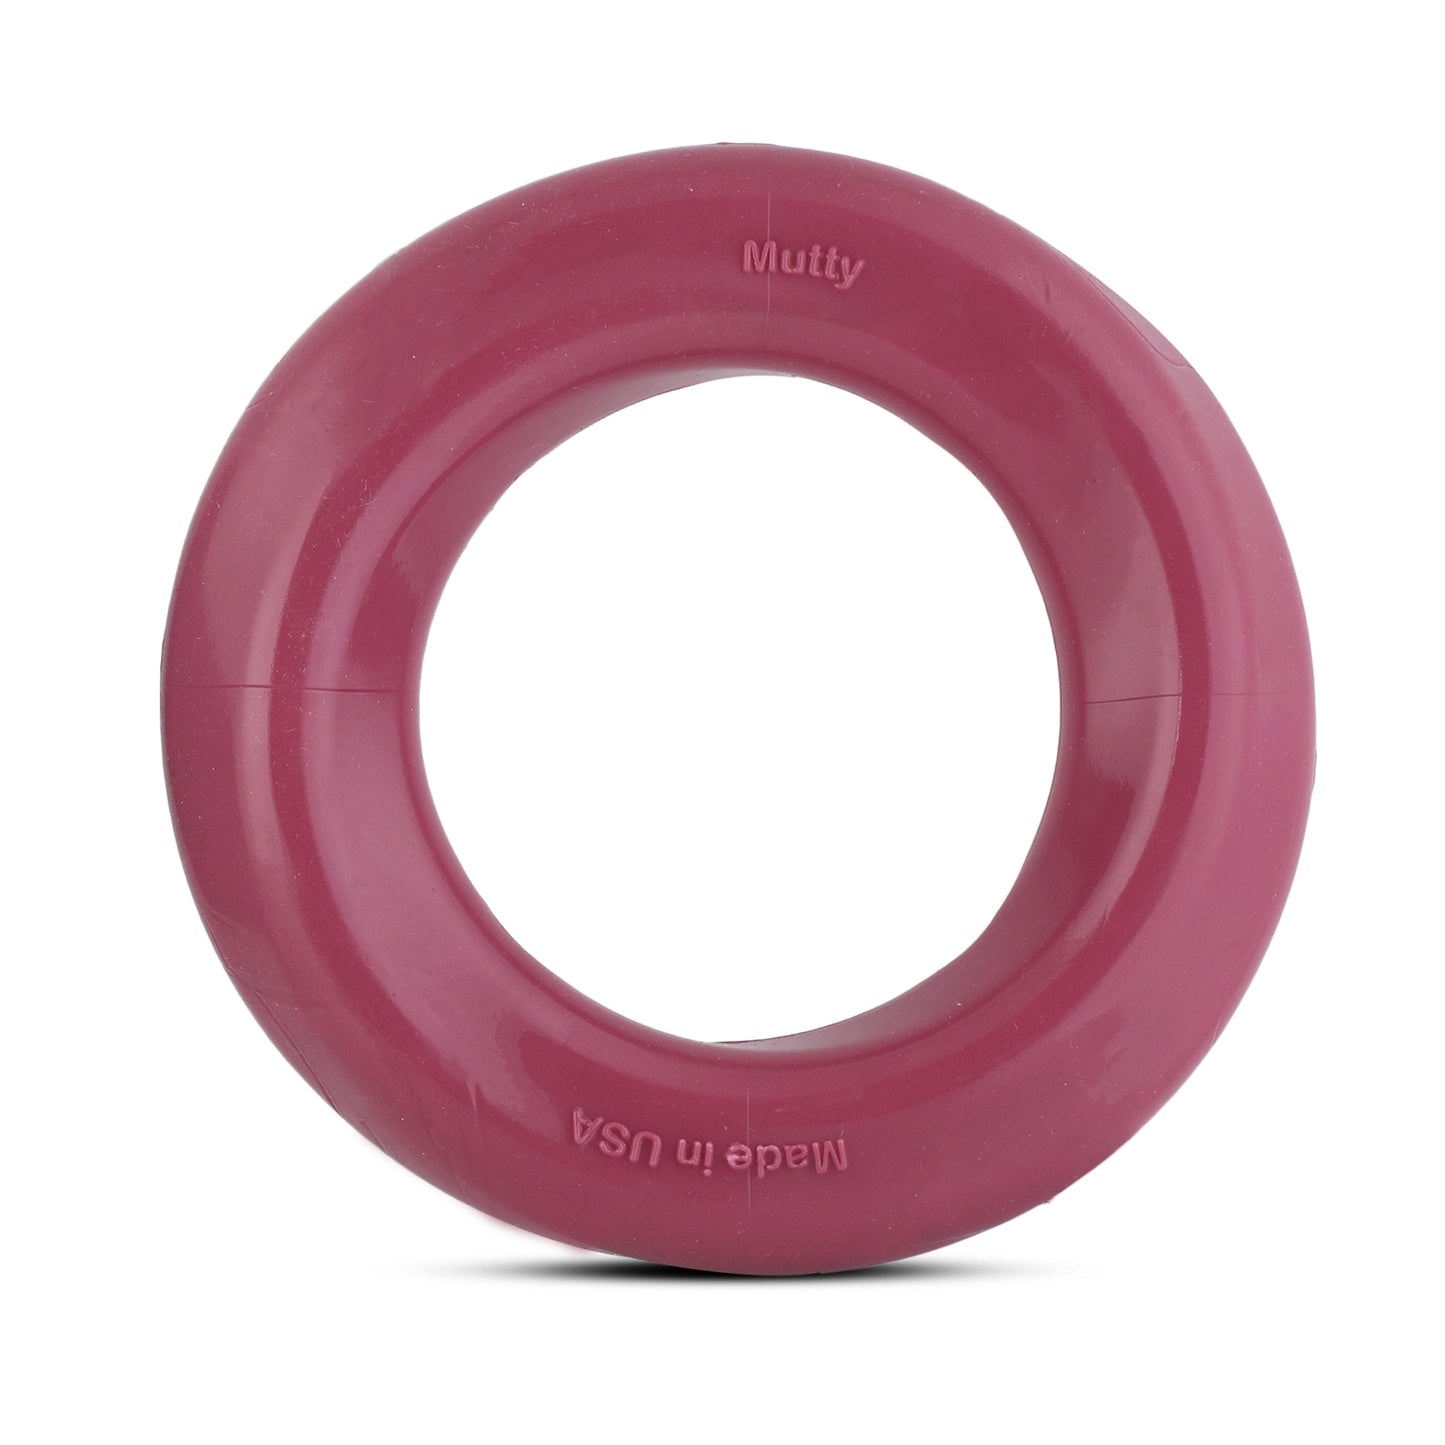 Mutty Dog Chew Ring - Made in USA Dog Toys for Chewers - One Meal Donated to Shelters per Toy